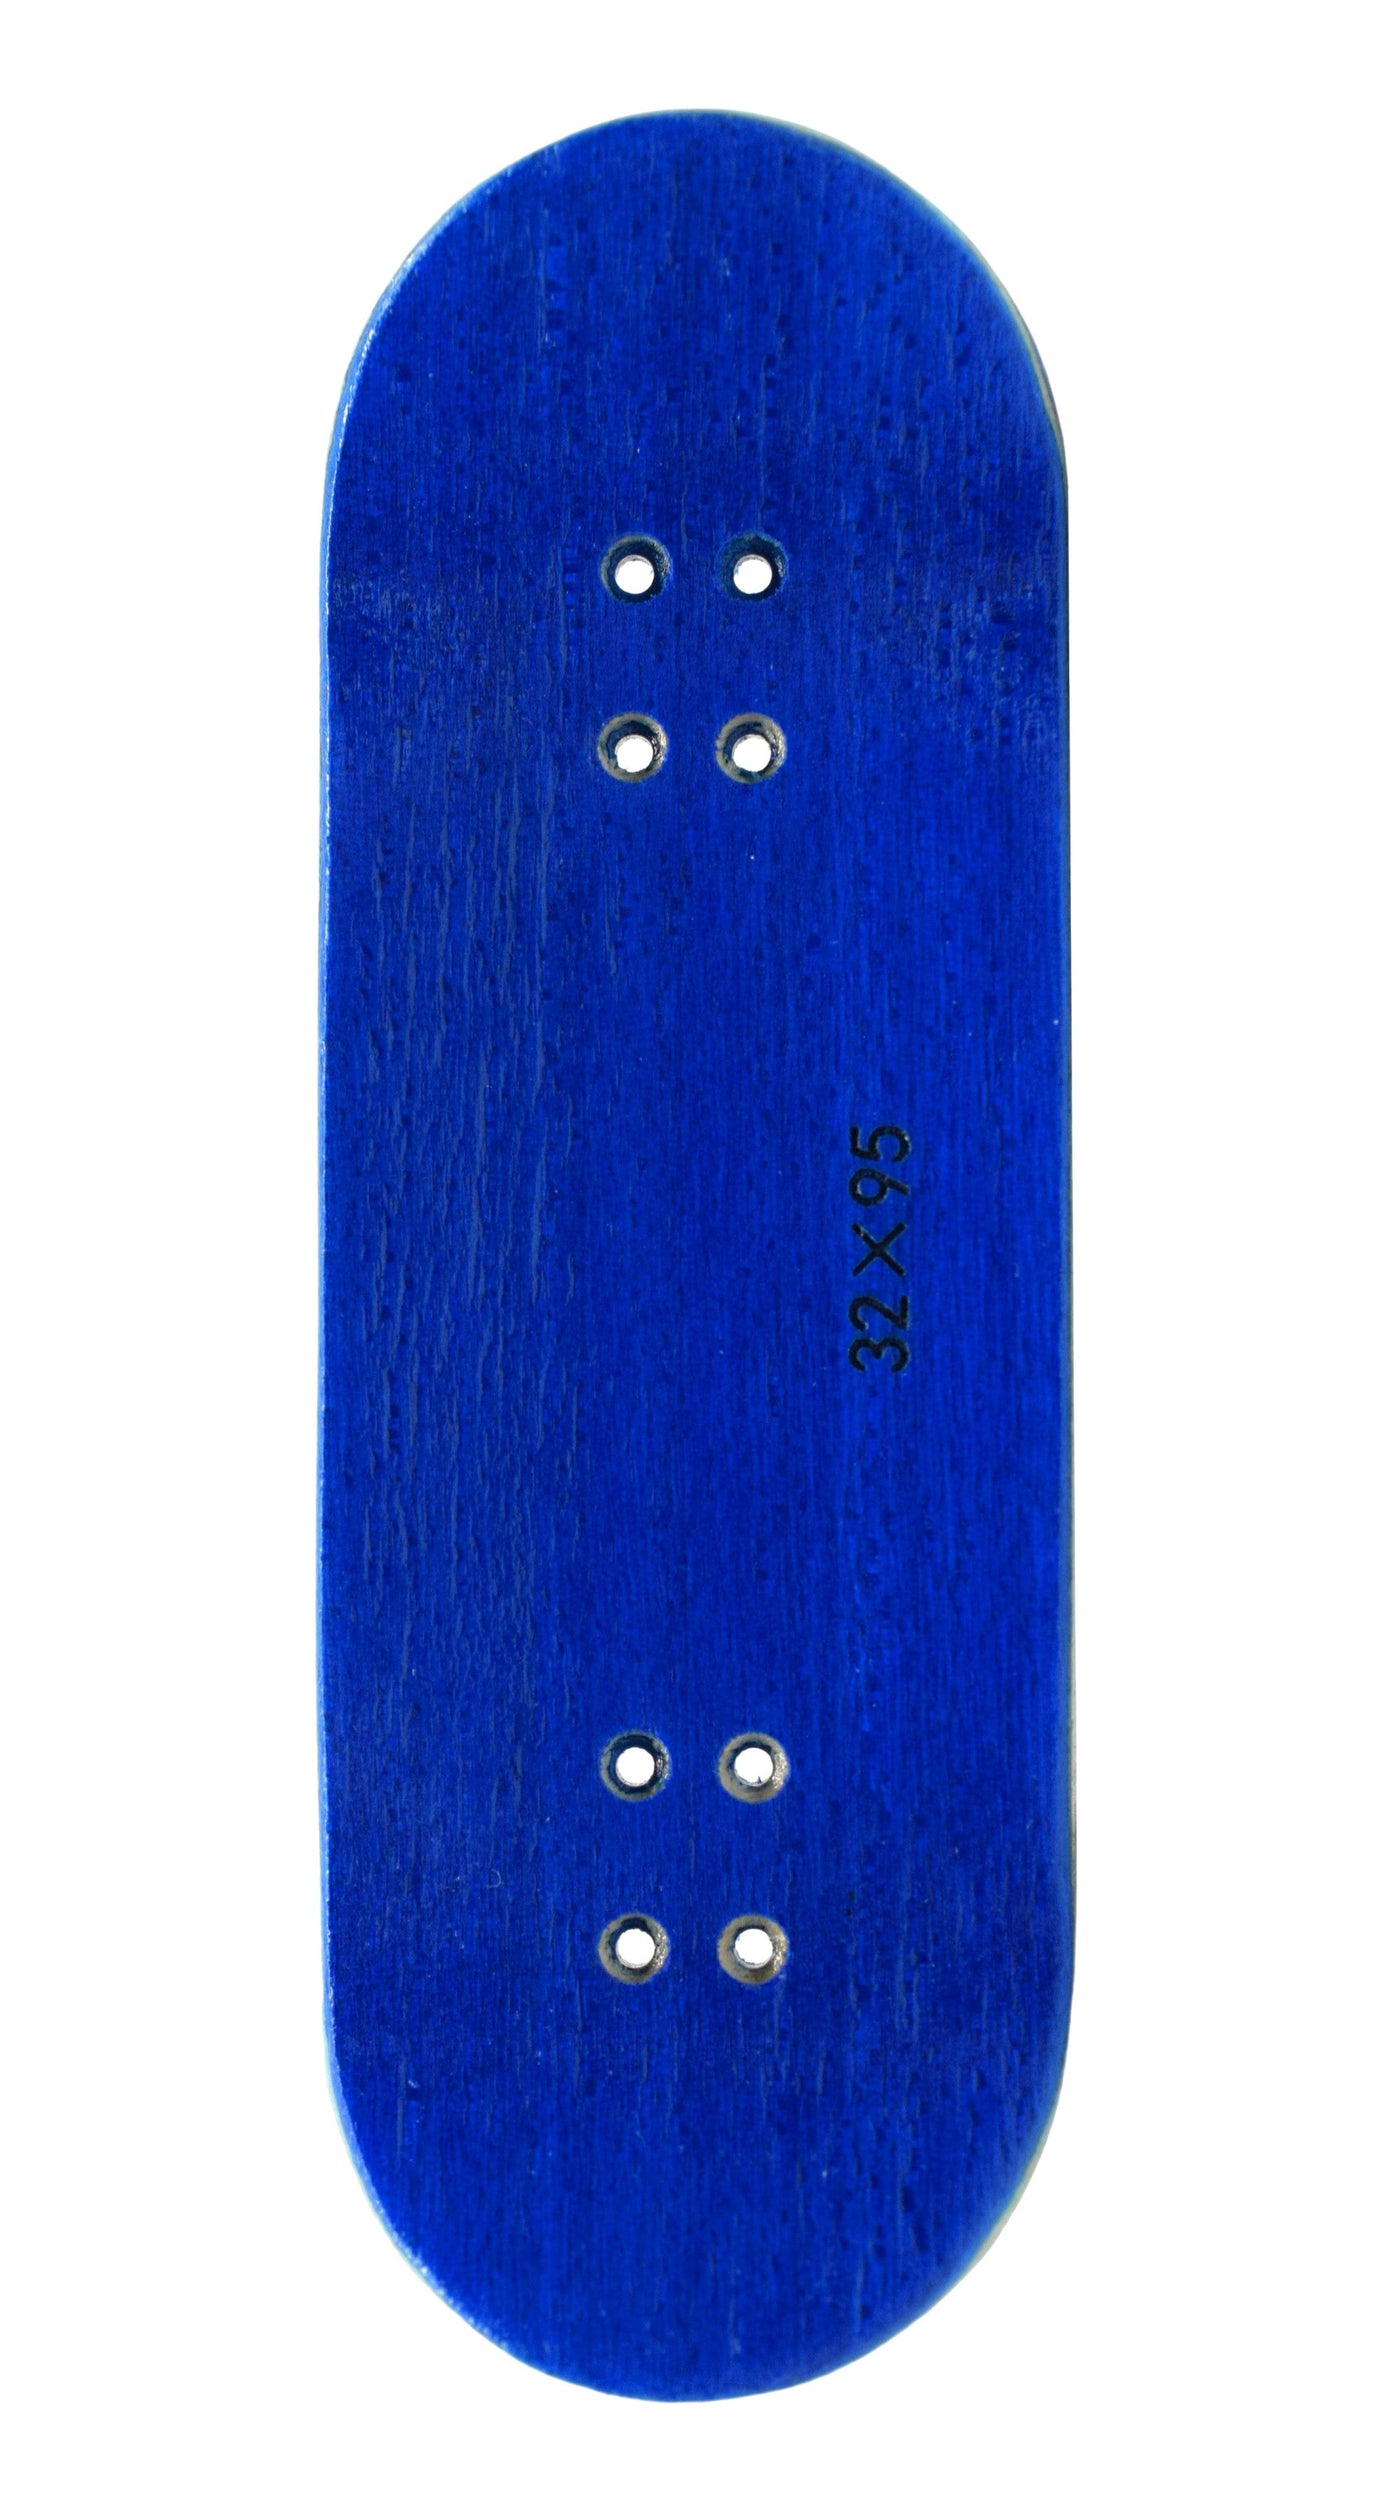 Teak Tuning PROlific Wooden 5 Ply Fingerboard Deck 32x95mm - Blizzard Blue - with Color Matching Mid Ply